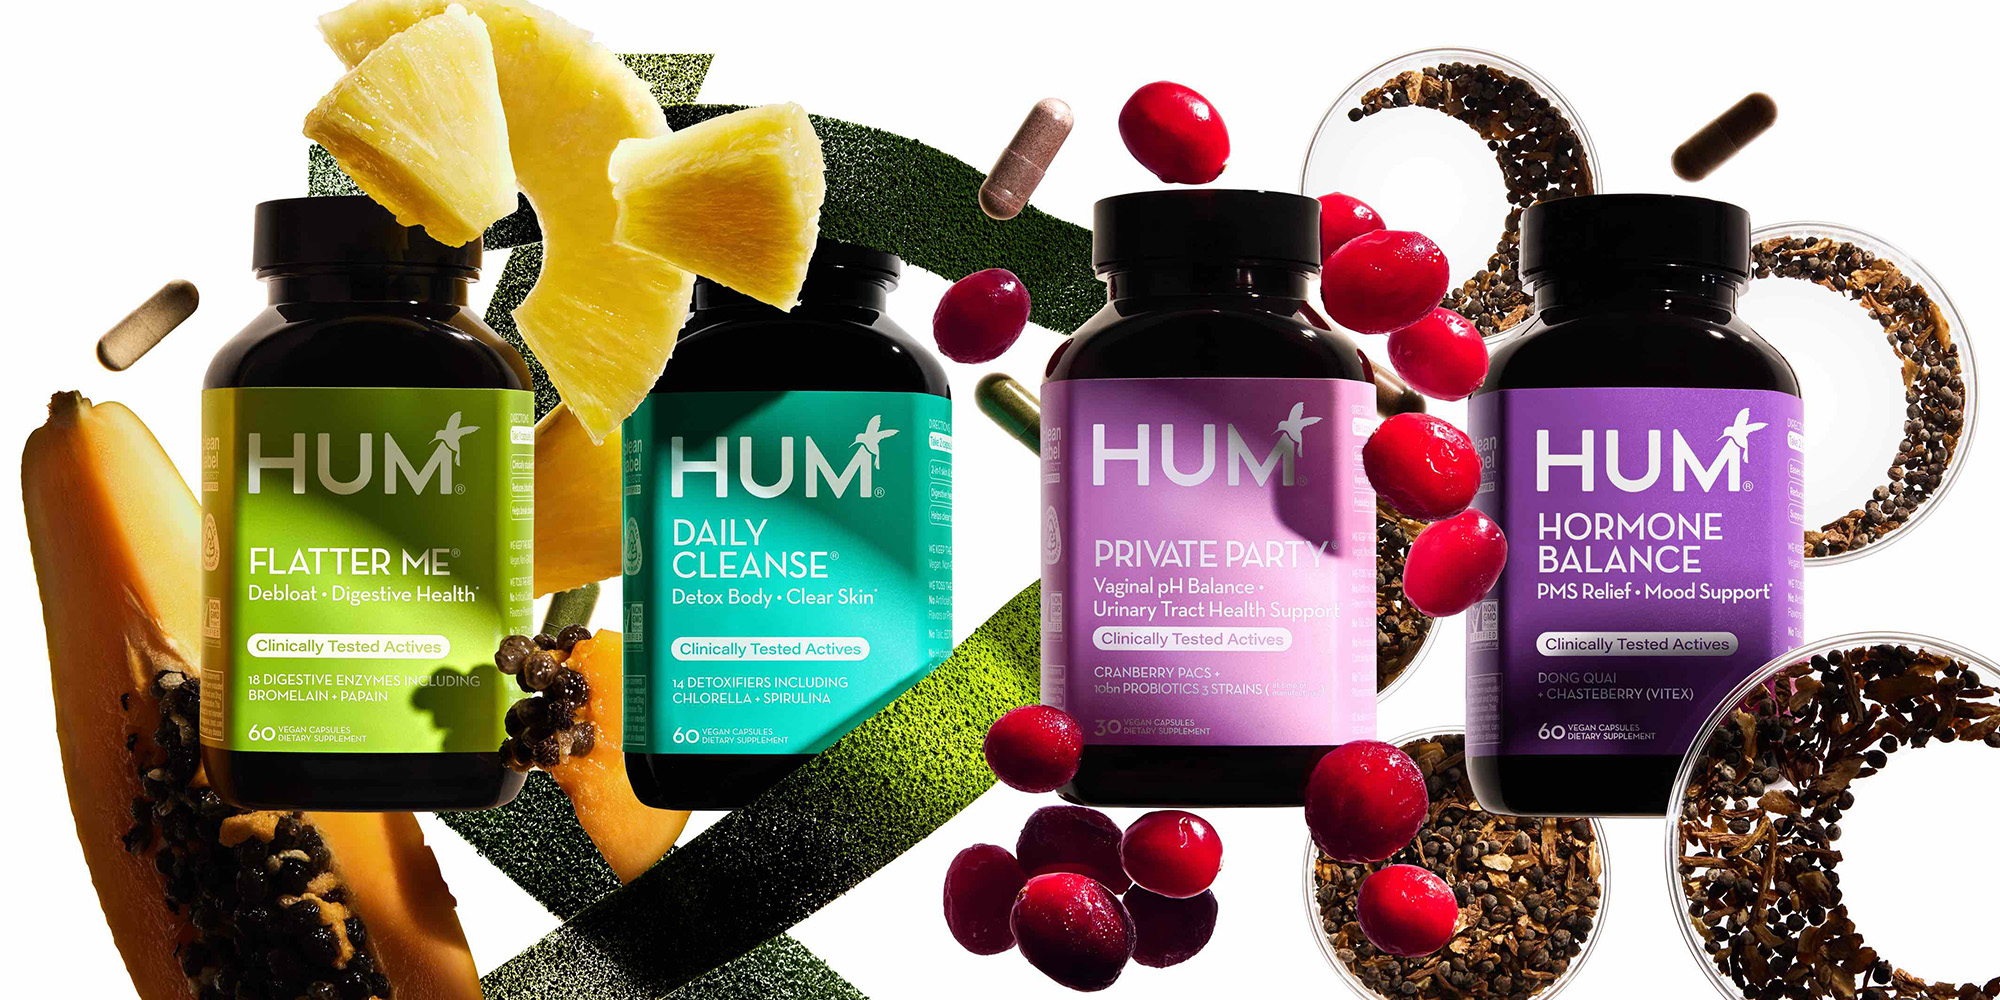 Why Hum Nutrition Shifted To The Mass Market